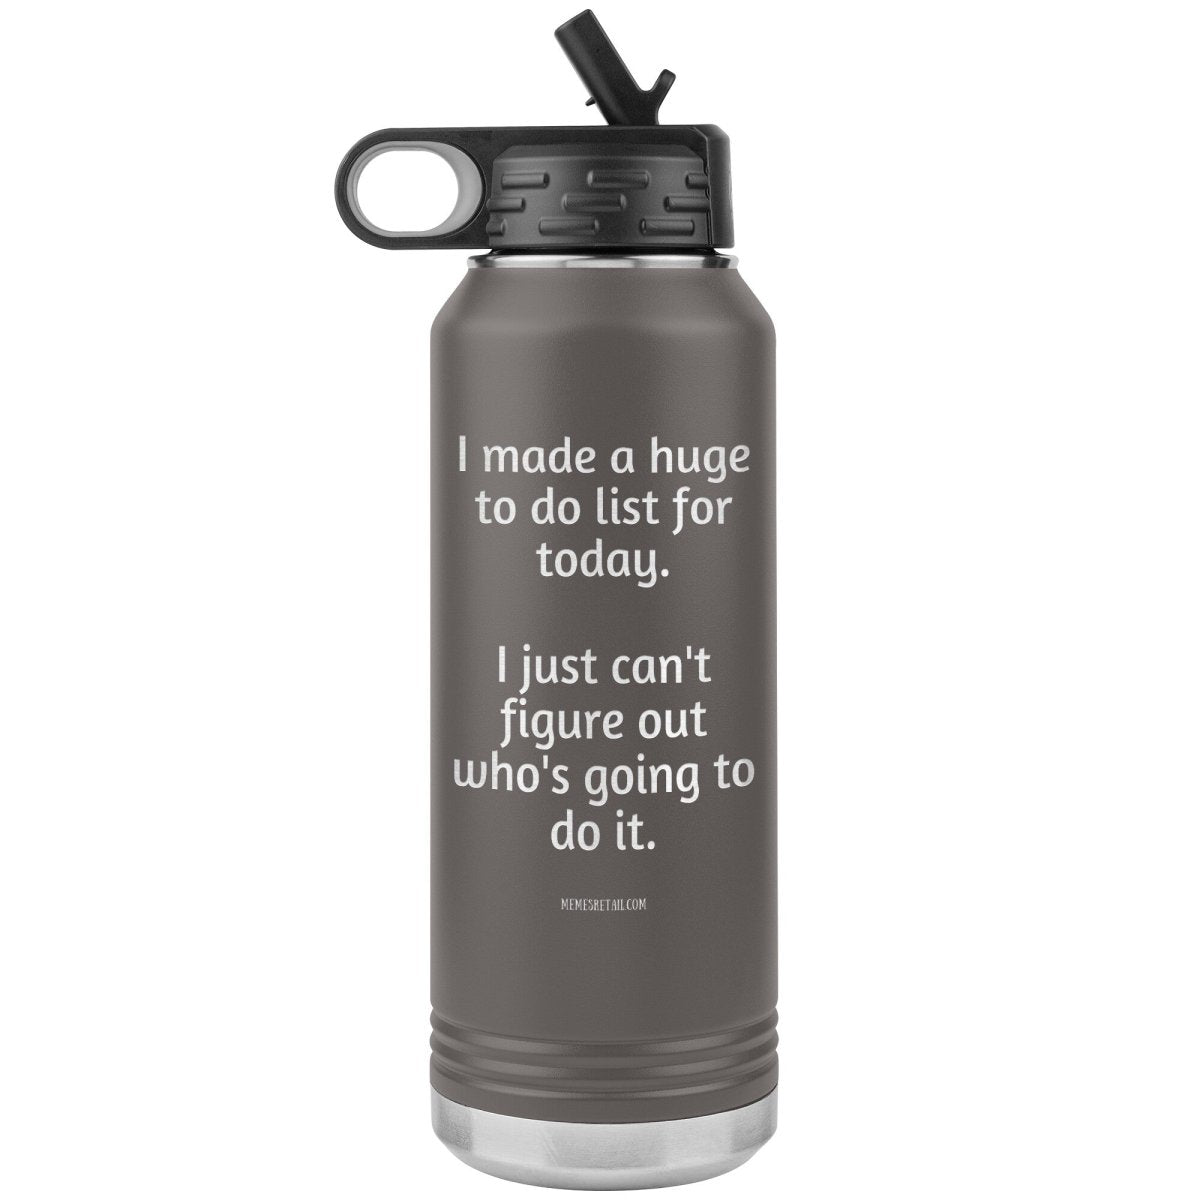 I made a huge to do list for today. I just can't figure out who's going to do it. 32 oz Water Tumbler, Pewter - MemesRetail.com